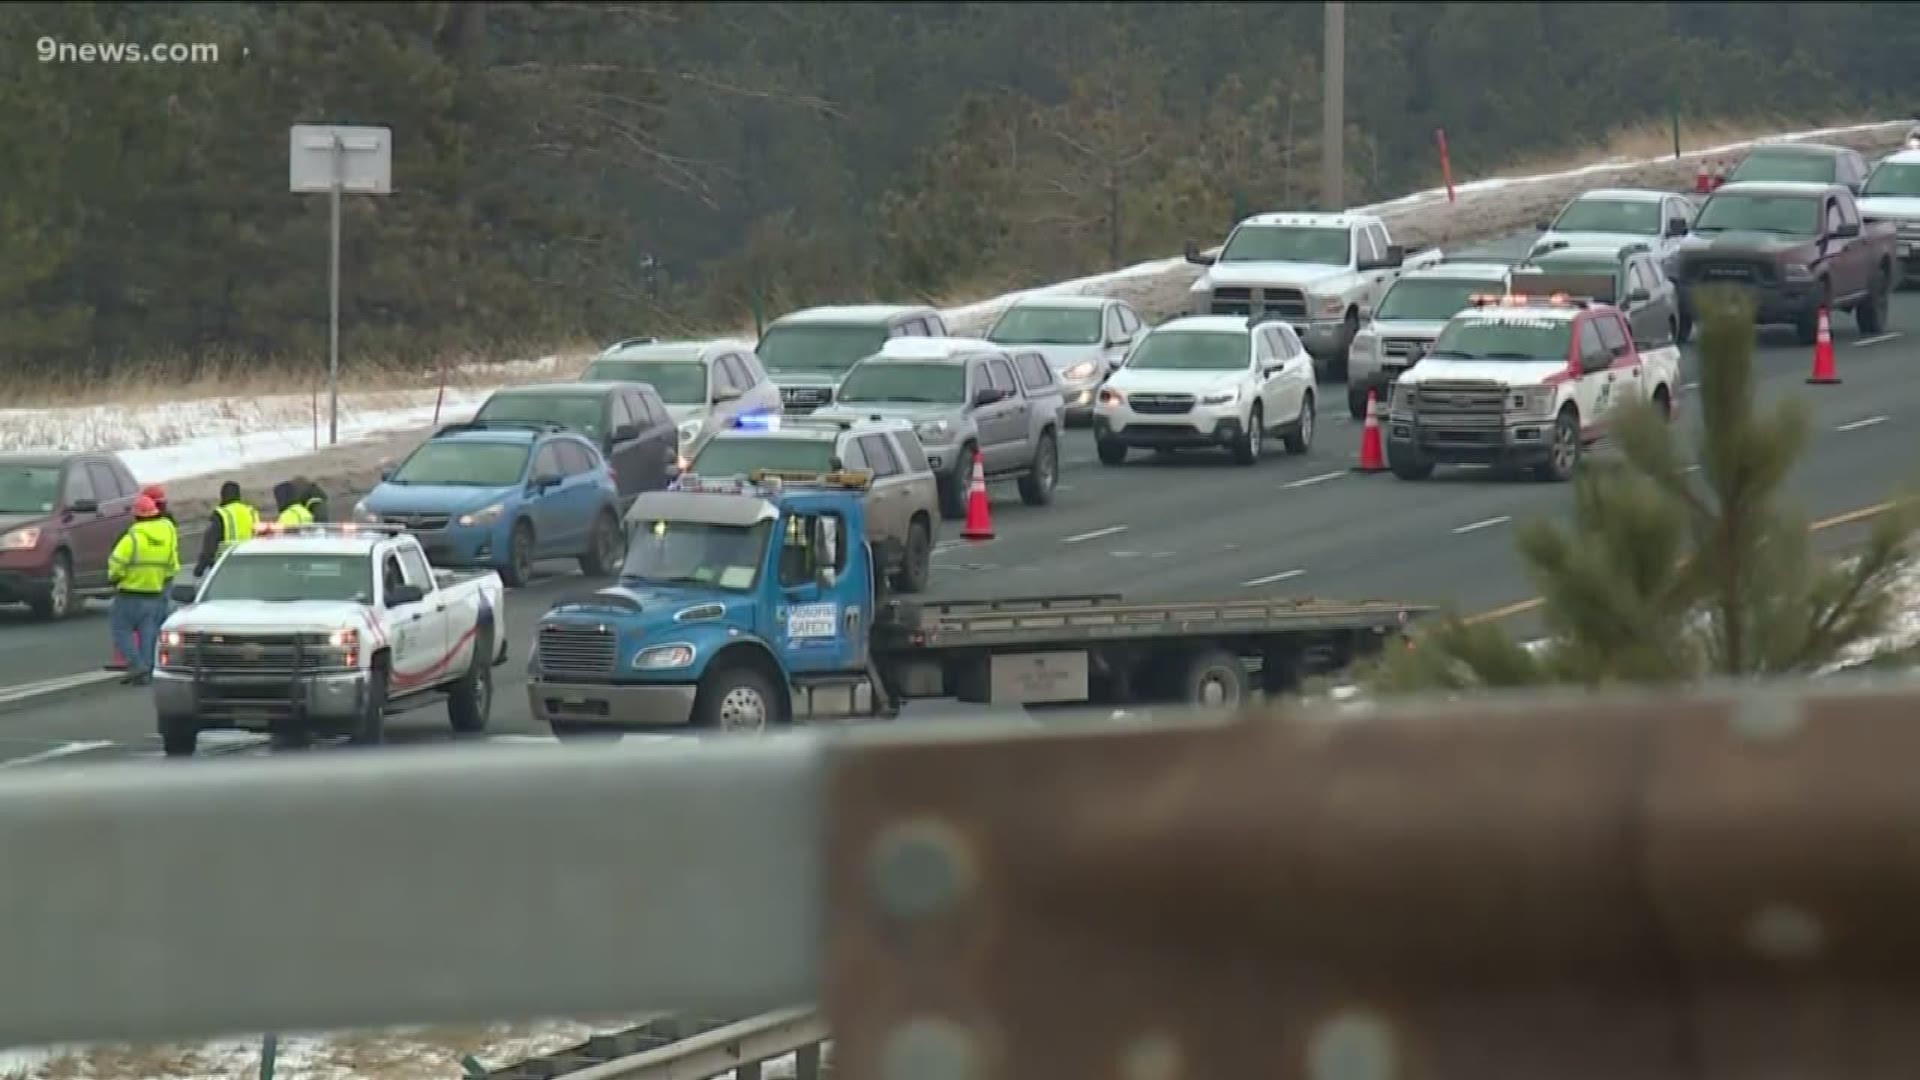 Drivers trying to go to the mountains for the holiday weekend were being turned around because of the interstate closure.